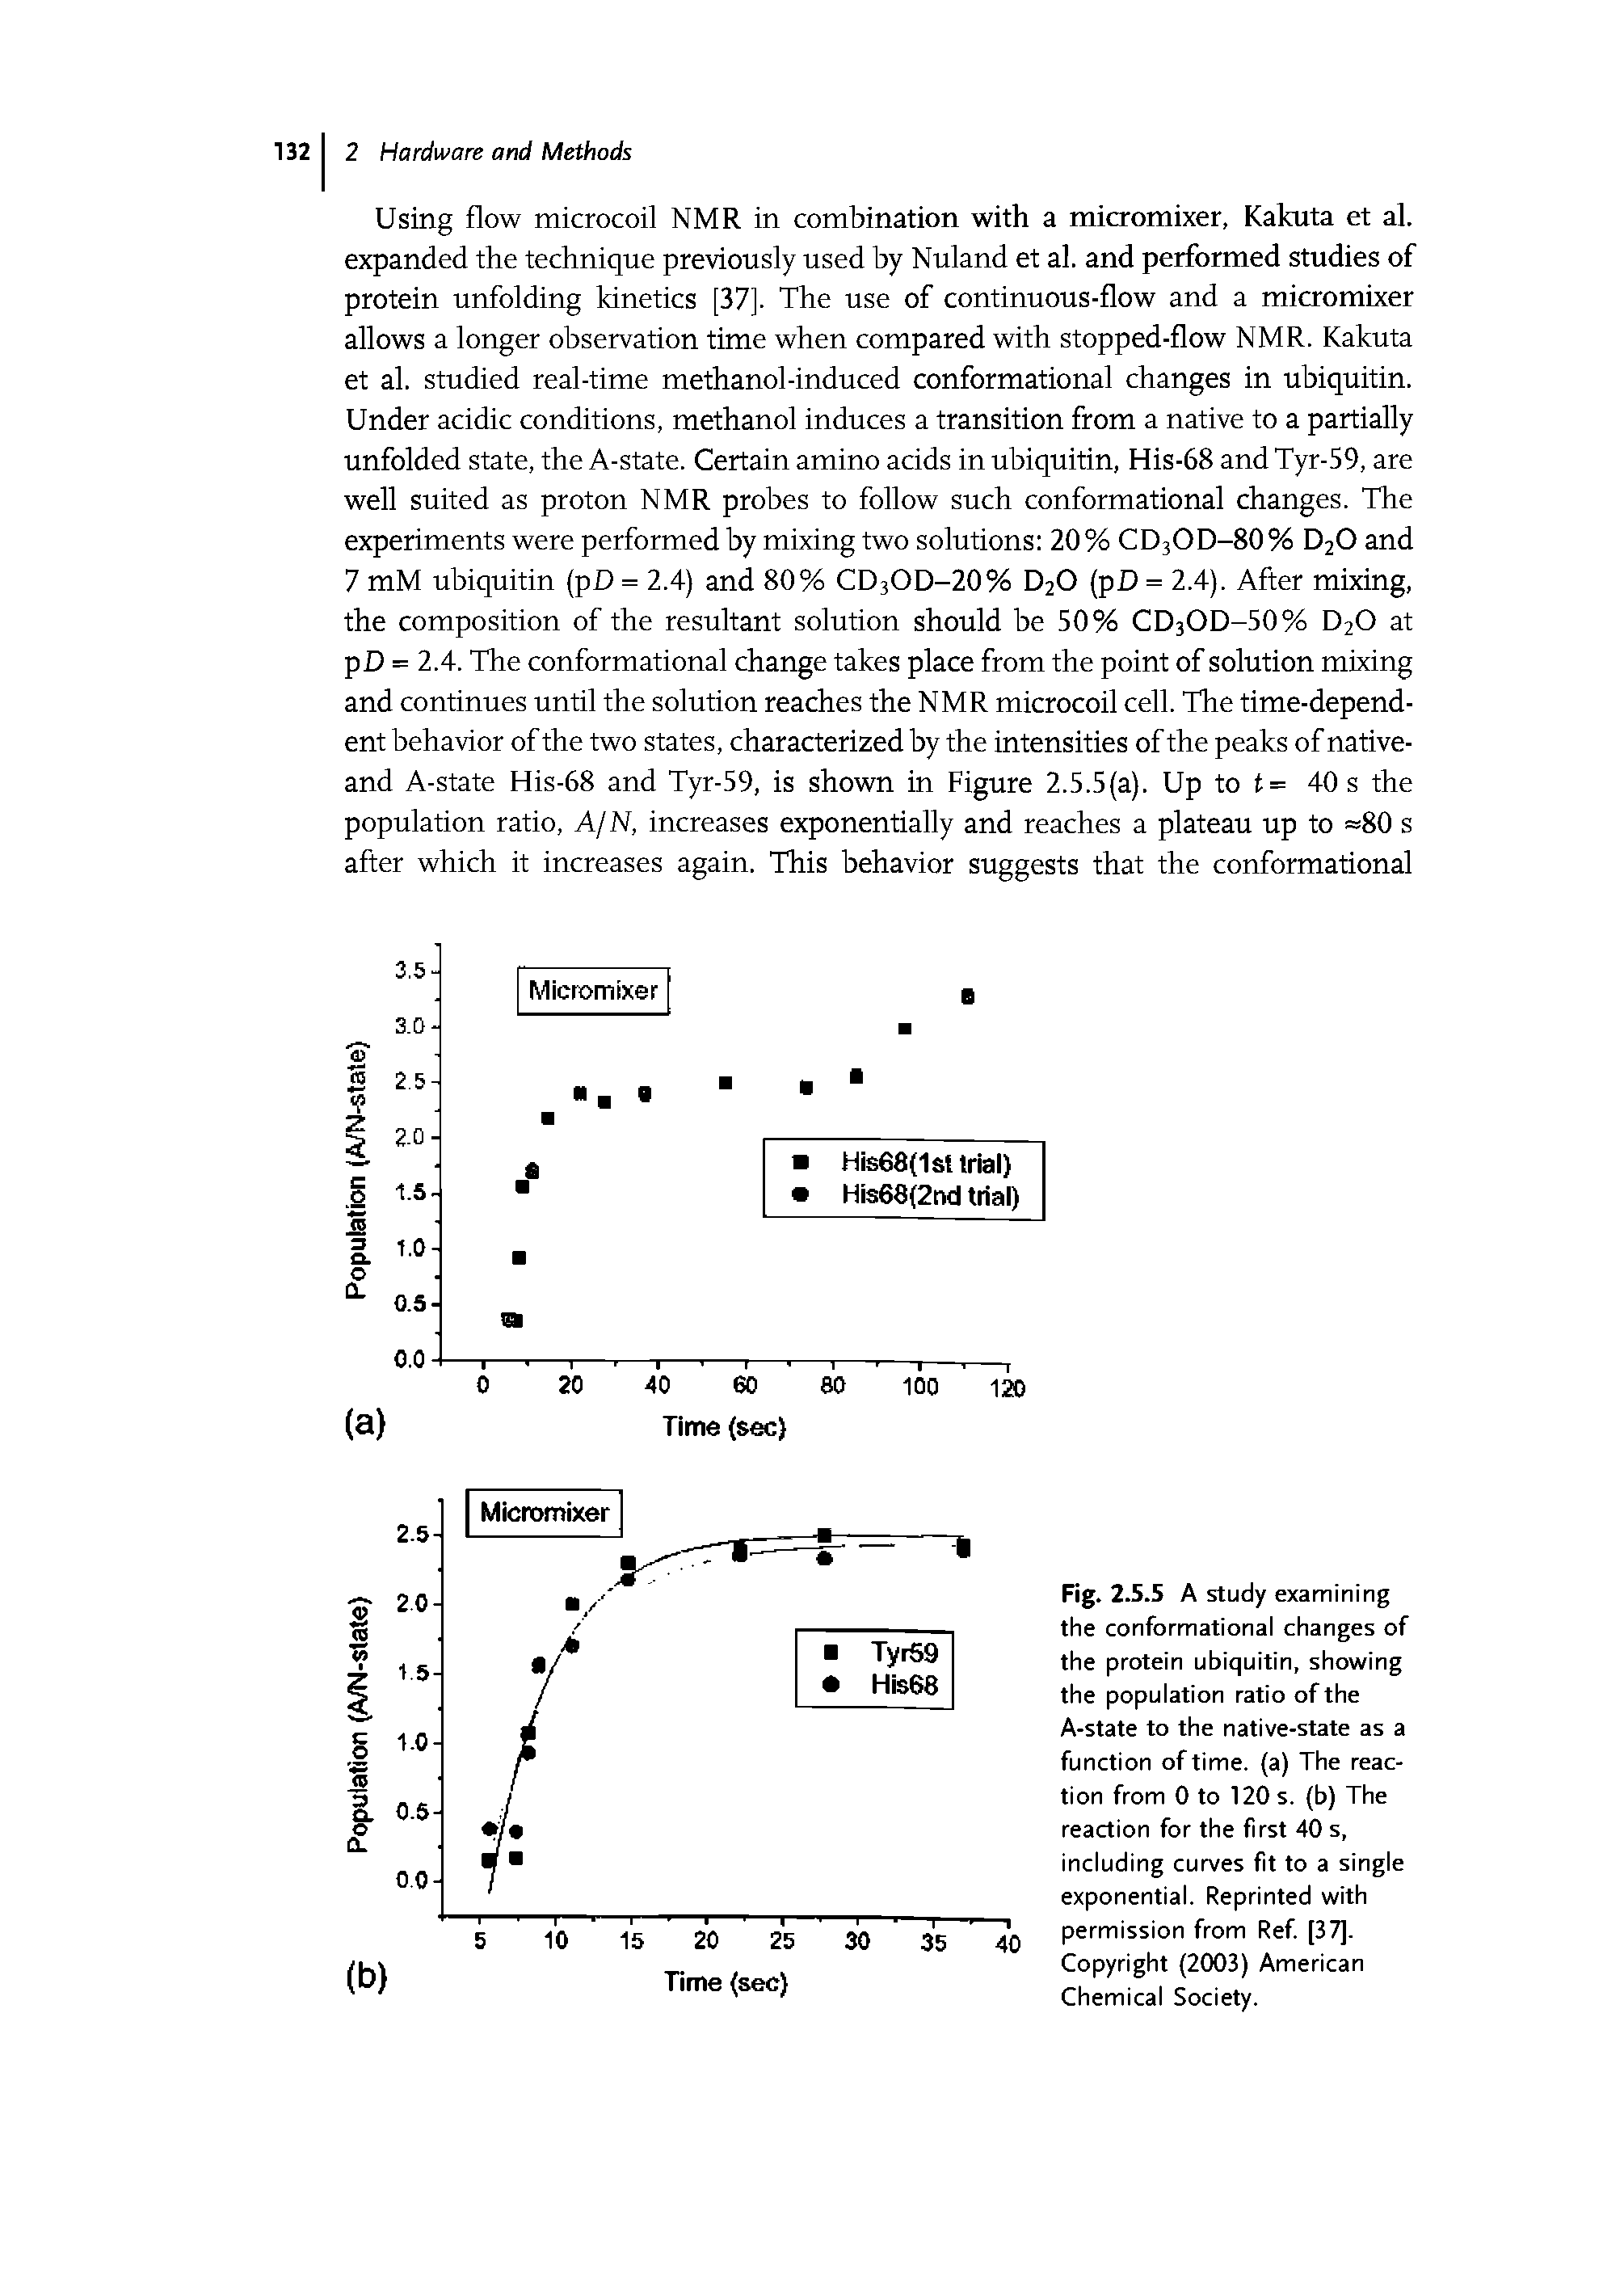 Fig. 2.5.5 A study examining the conformational changes of the protein ubiquitin, showing the population ratio of the A-state to the native-state as a function of time, (a) The reaction from 0 to 120 s. (b) The reaction for the first 40 s, including curves fit to a single exponential. Reprinted with permission from Ref. [37]. Copyright (2003) American Chemical Society.